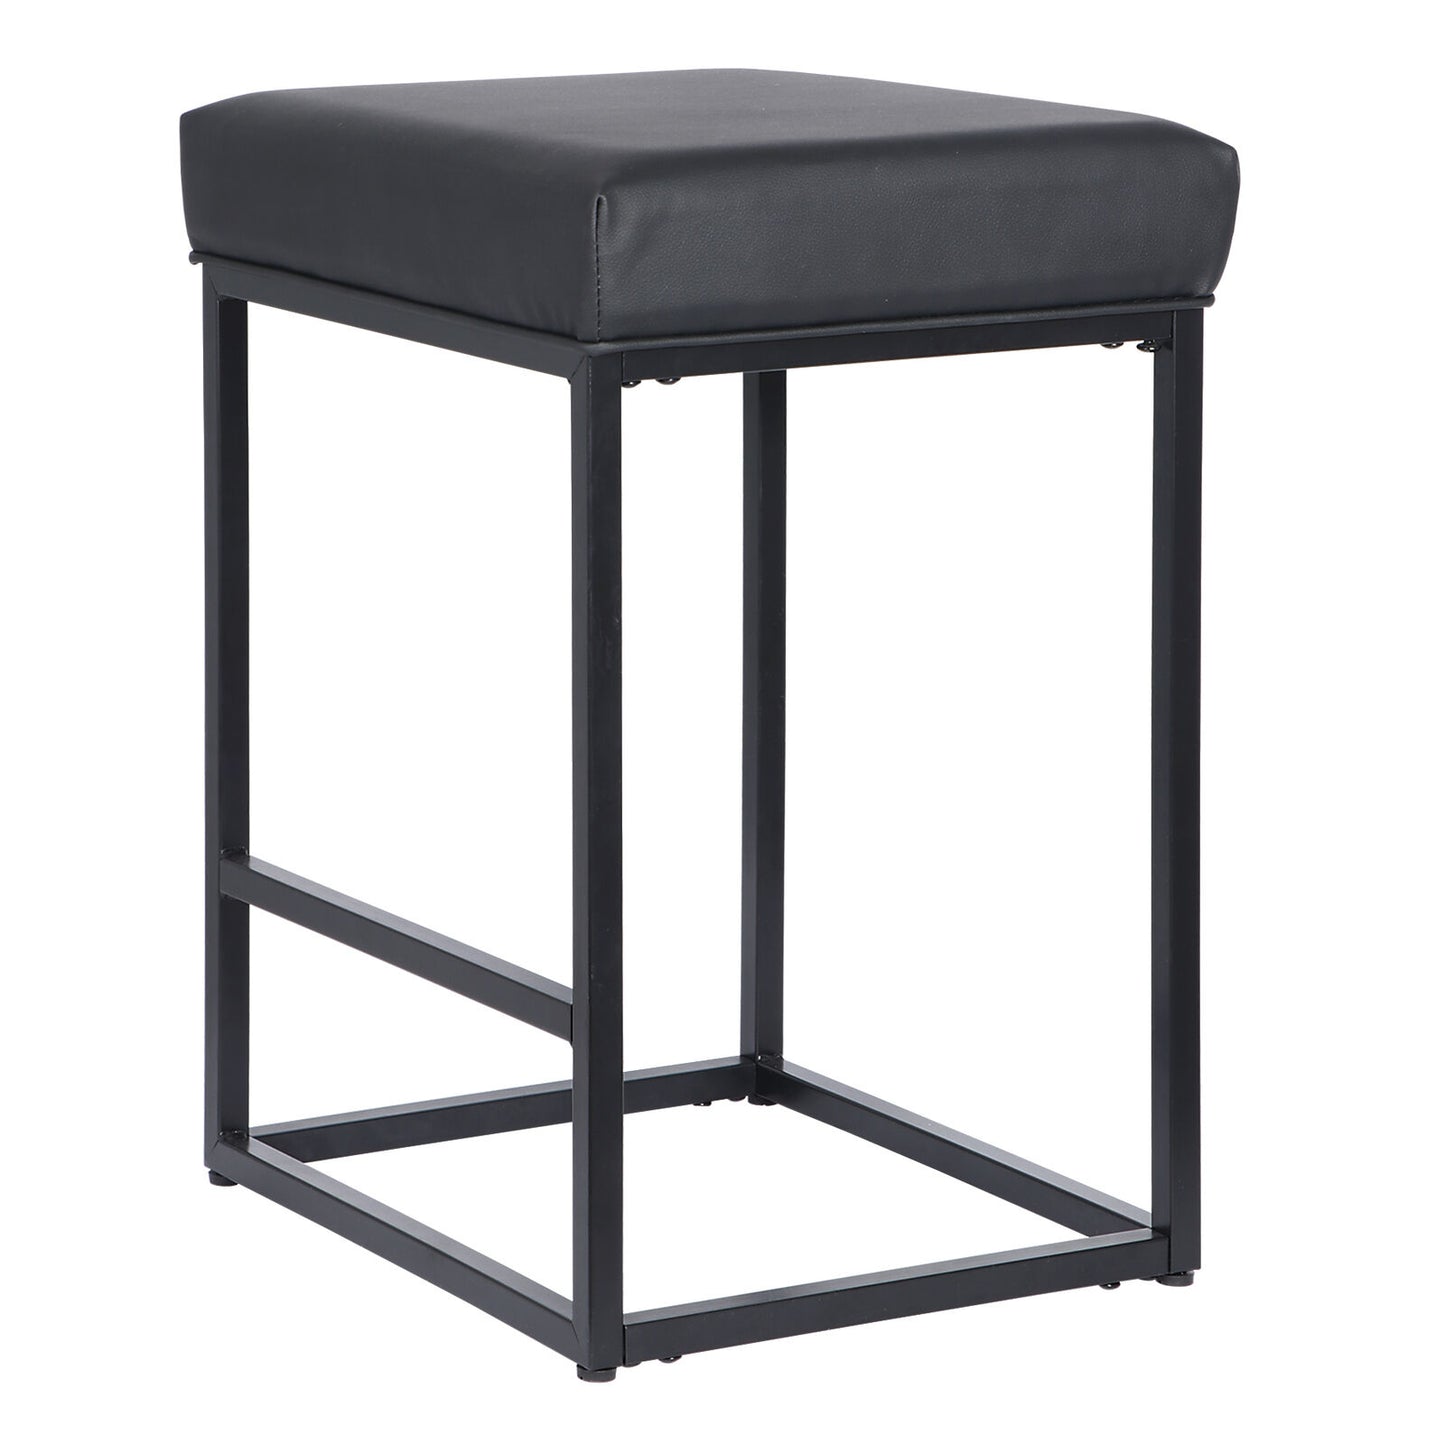 Black Counter Height 24" Bar Stools Set of 2 for Kitchen Counter Backless Modern